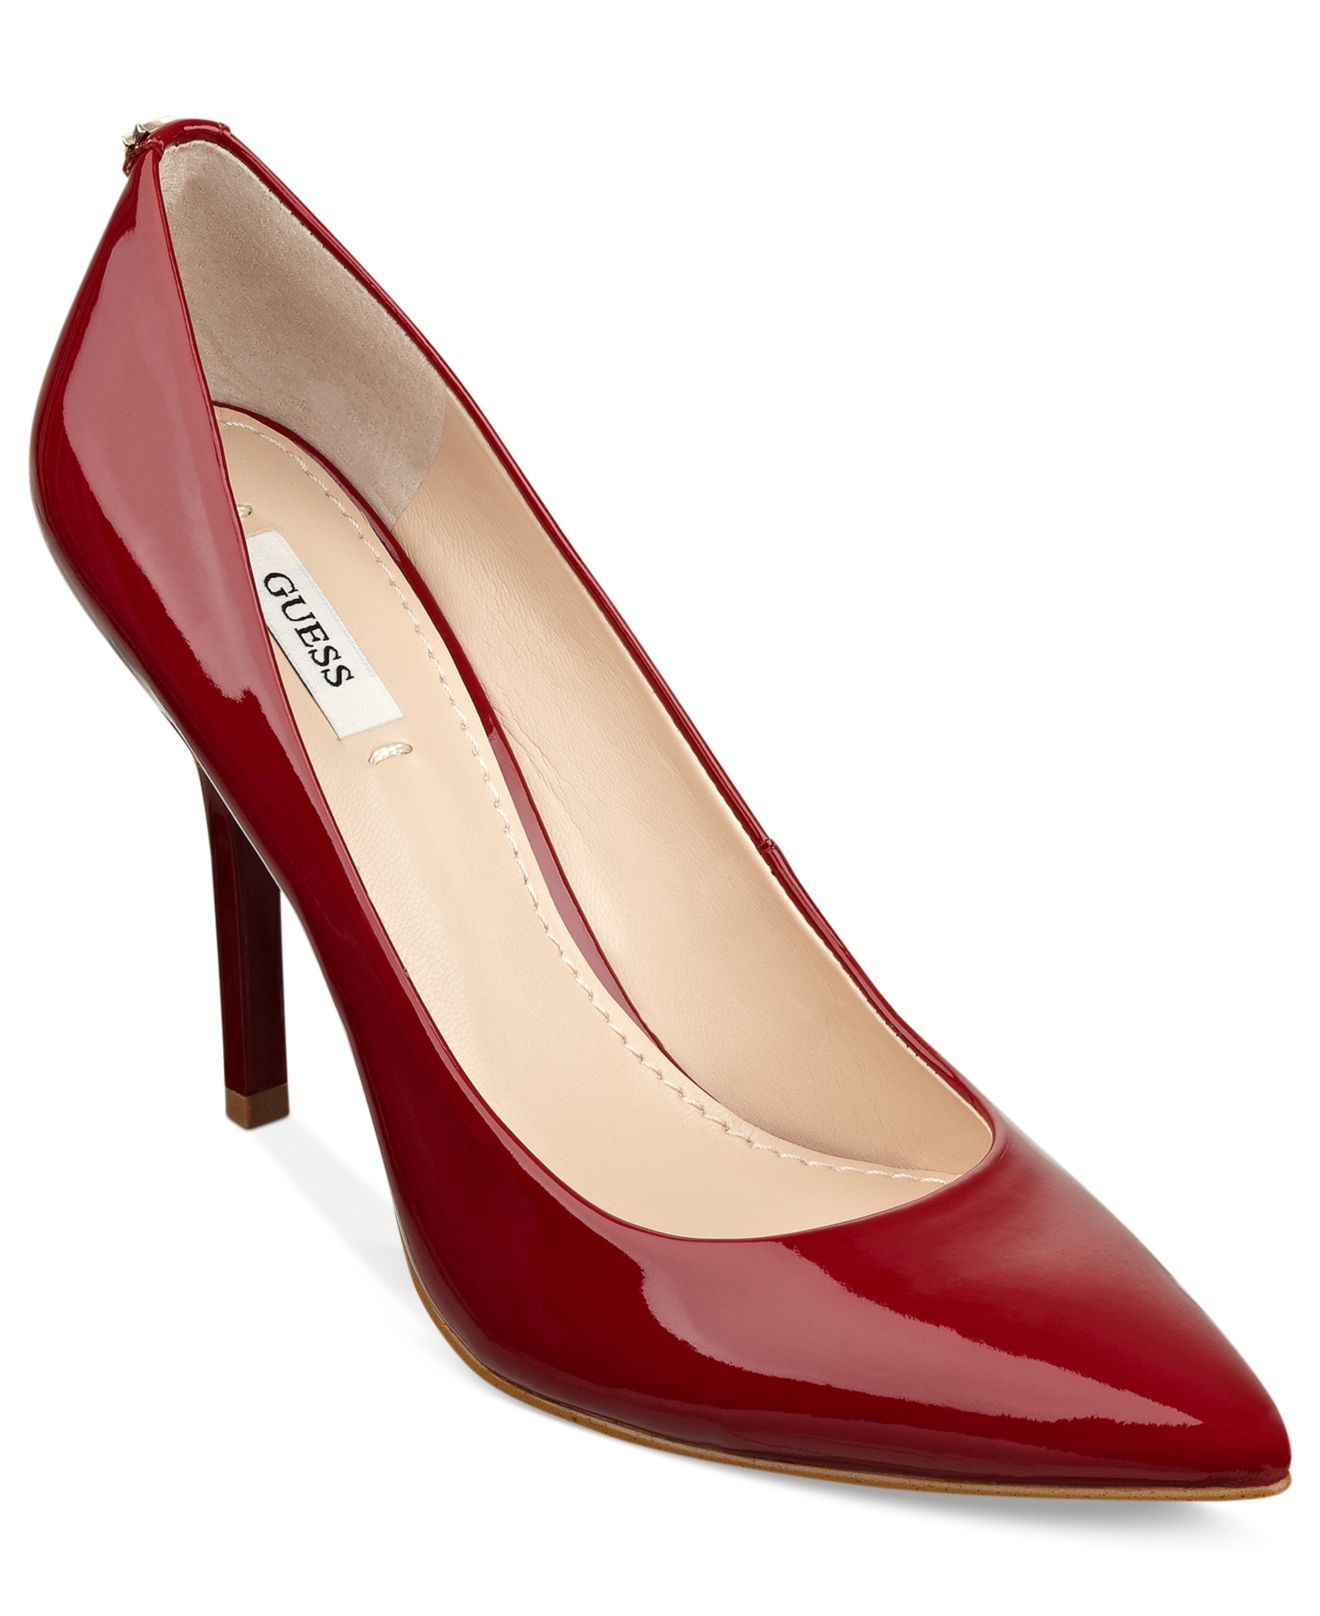 Lyst - Guess Plasma Pumps in Red